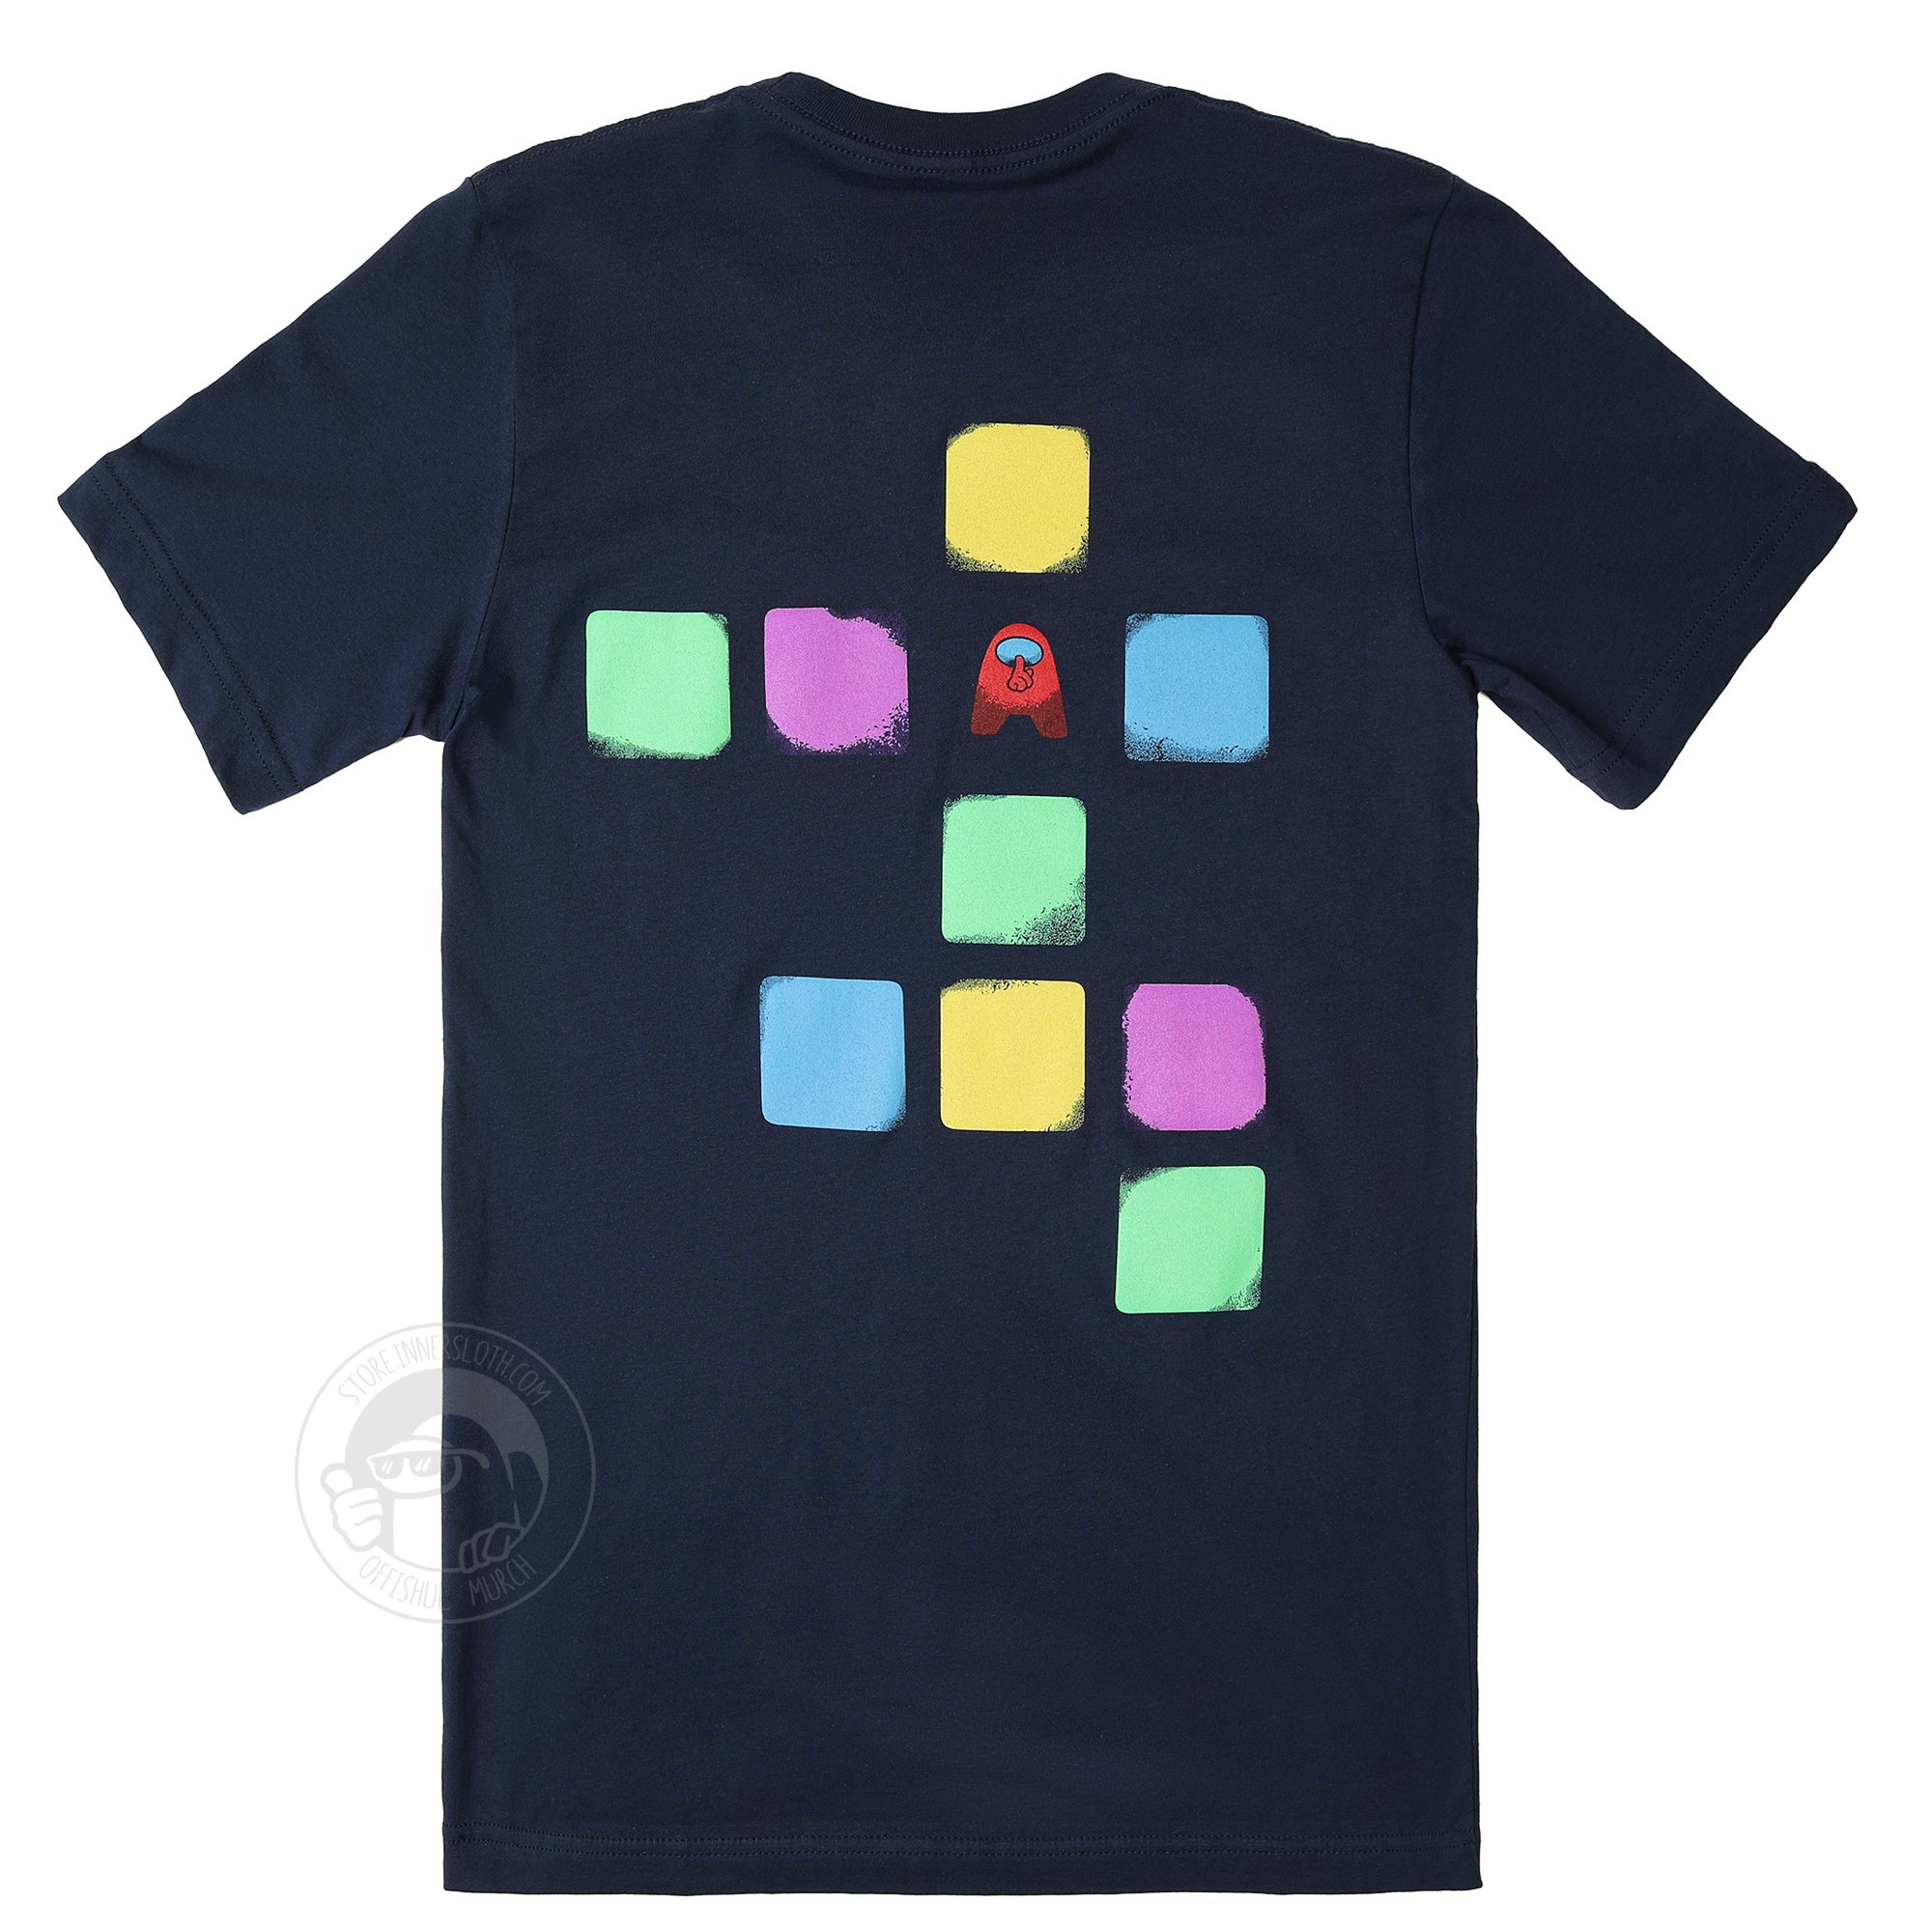 A product photo of the Among Us: Cosmicube Tee. It is a deep navy t-shirt, and the front shows a red crewmate reaching up toward a yellow star at the left breast. 